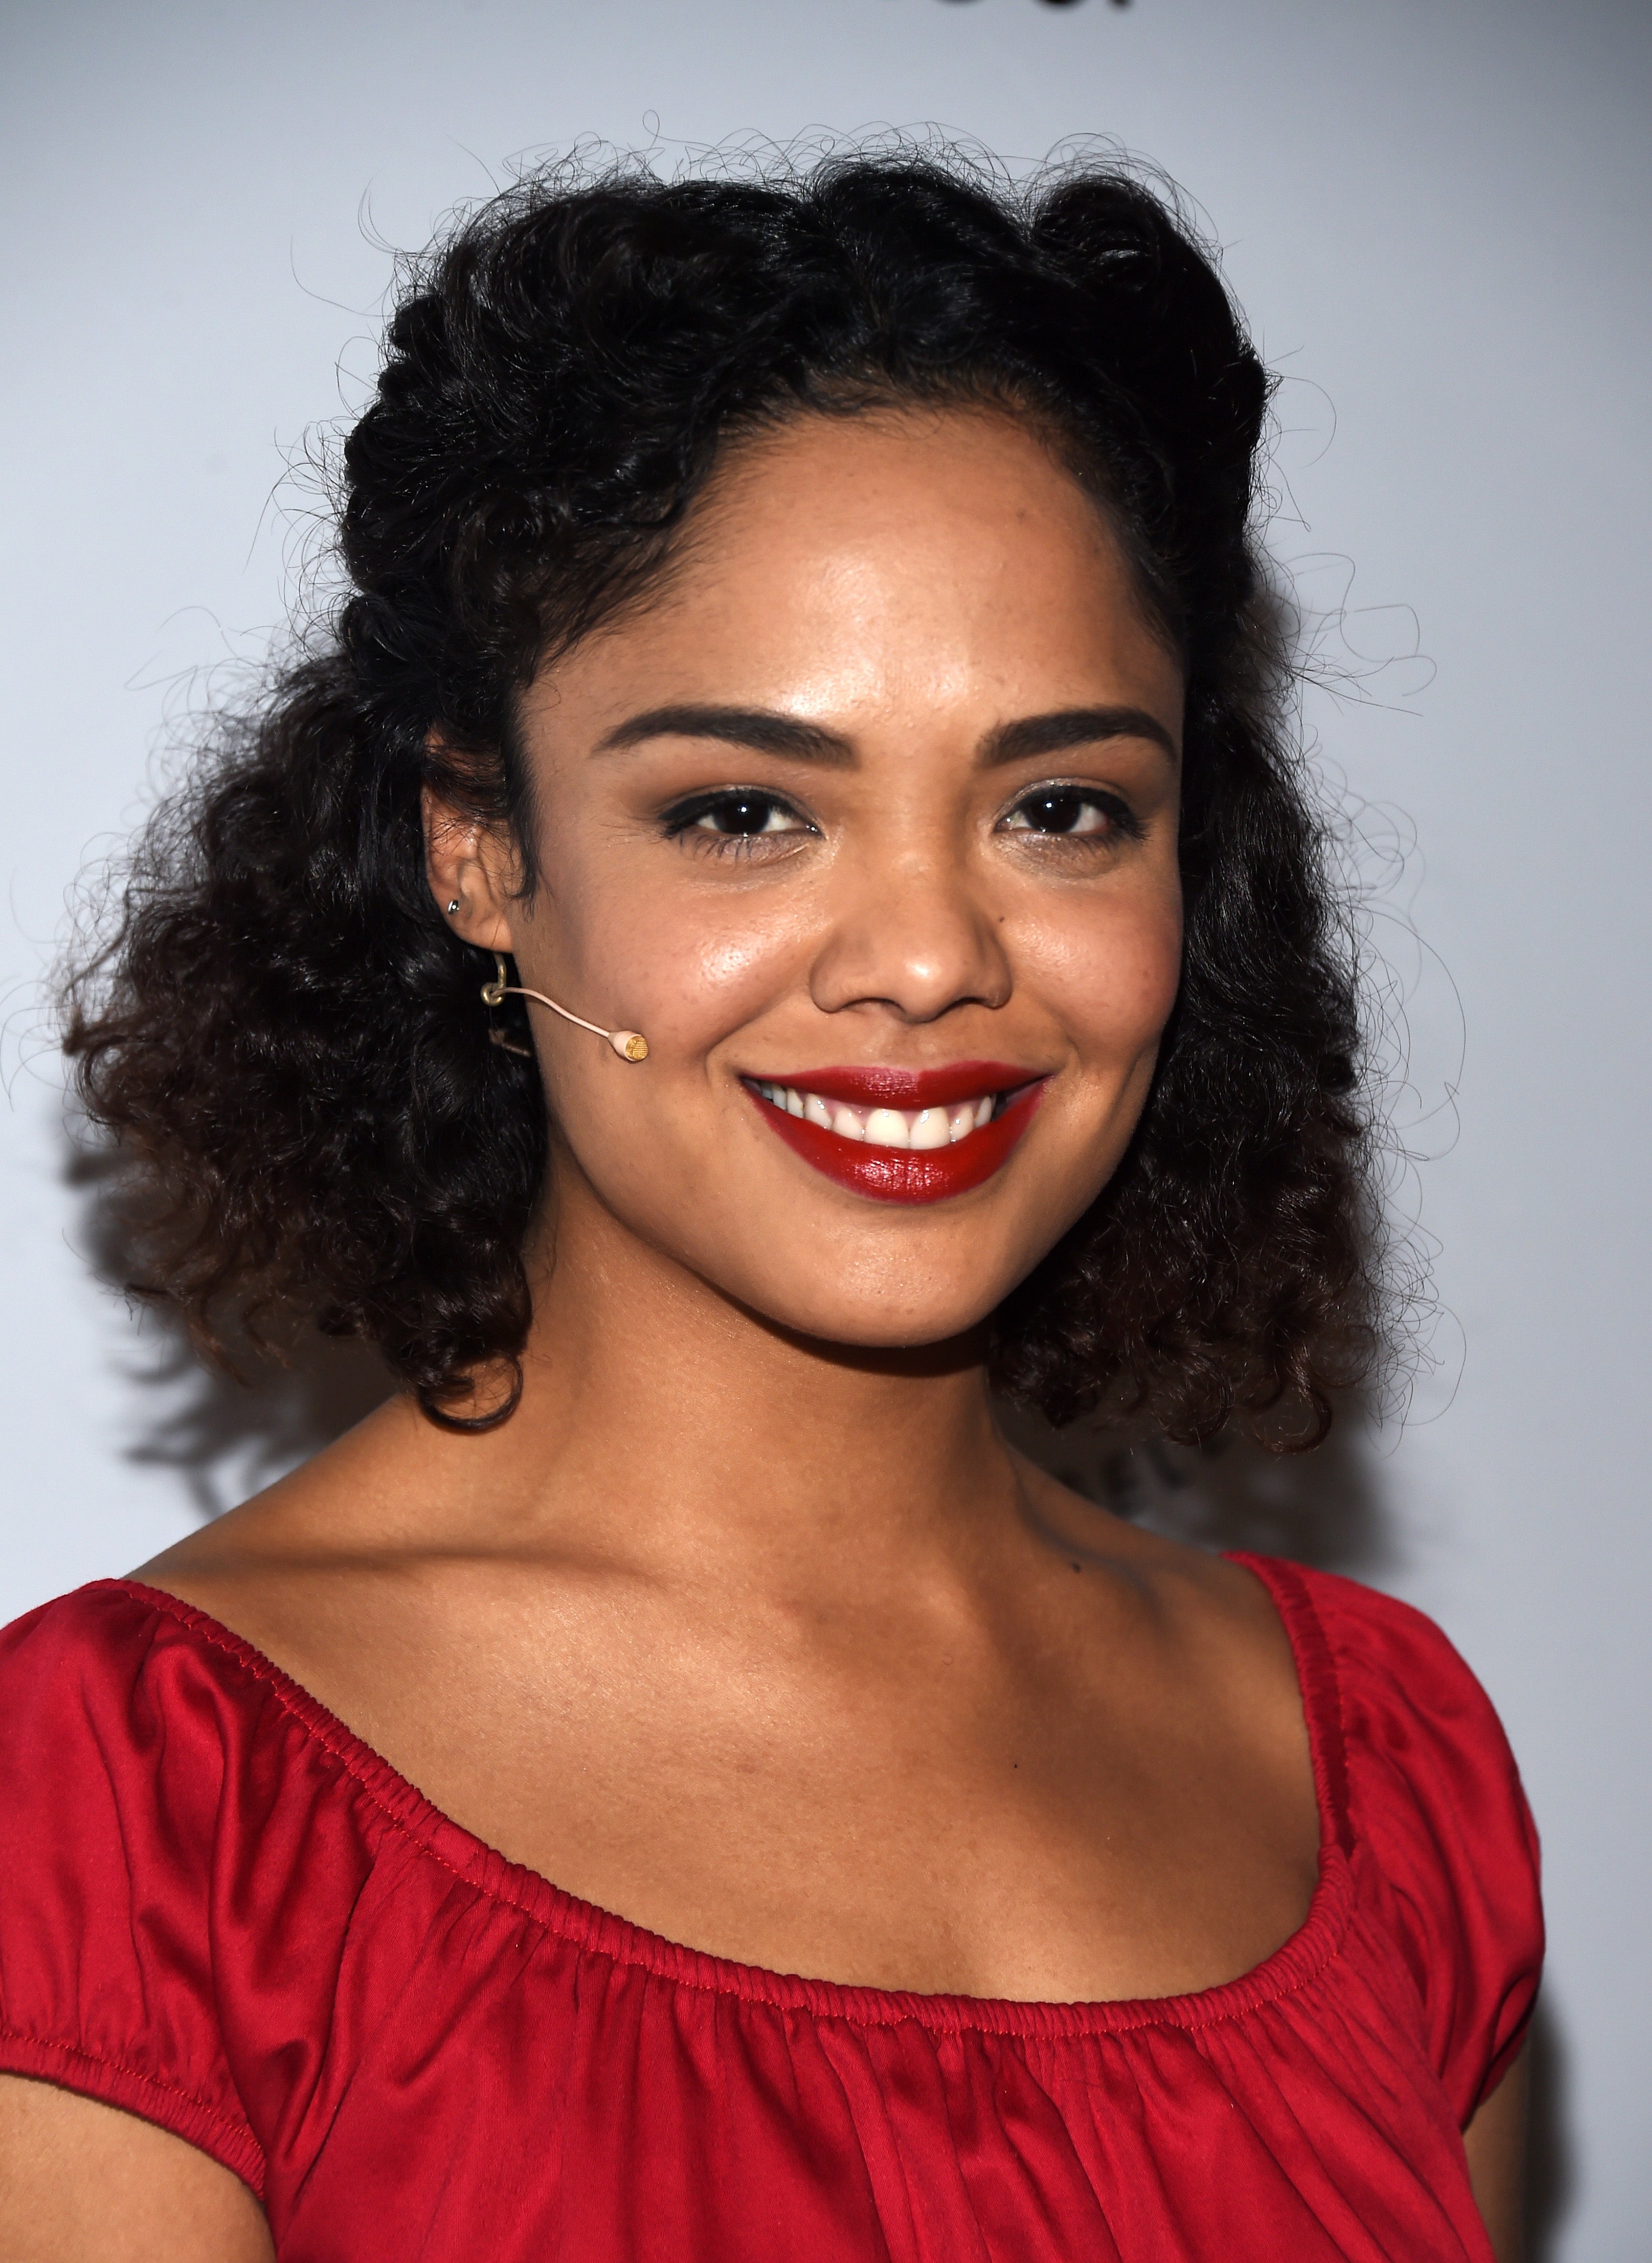 An Ode to Tessa Thompson’s Ethereal Beauty